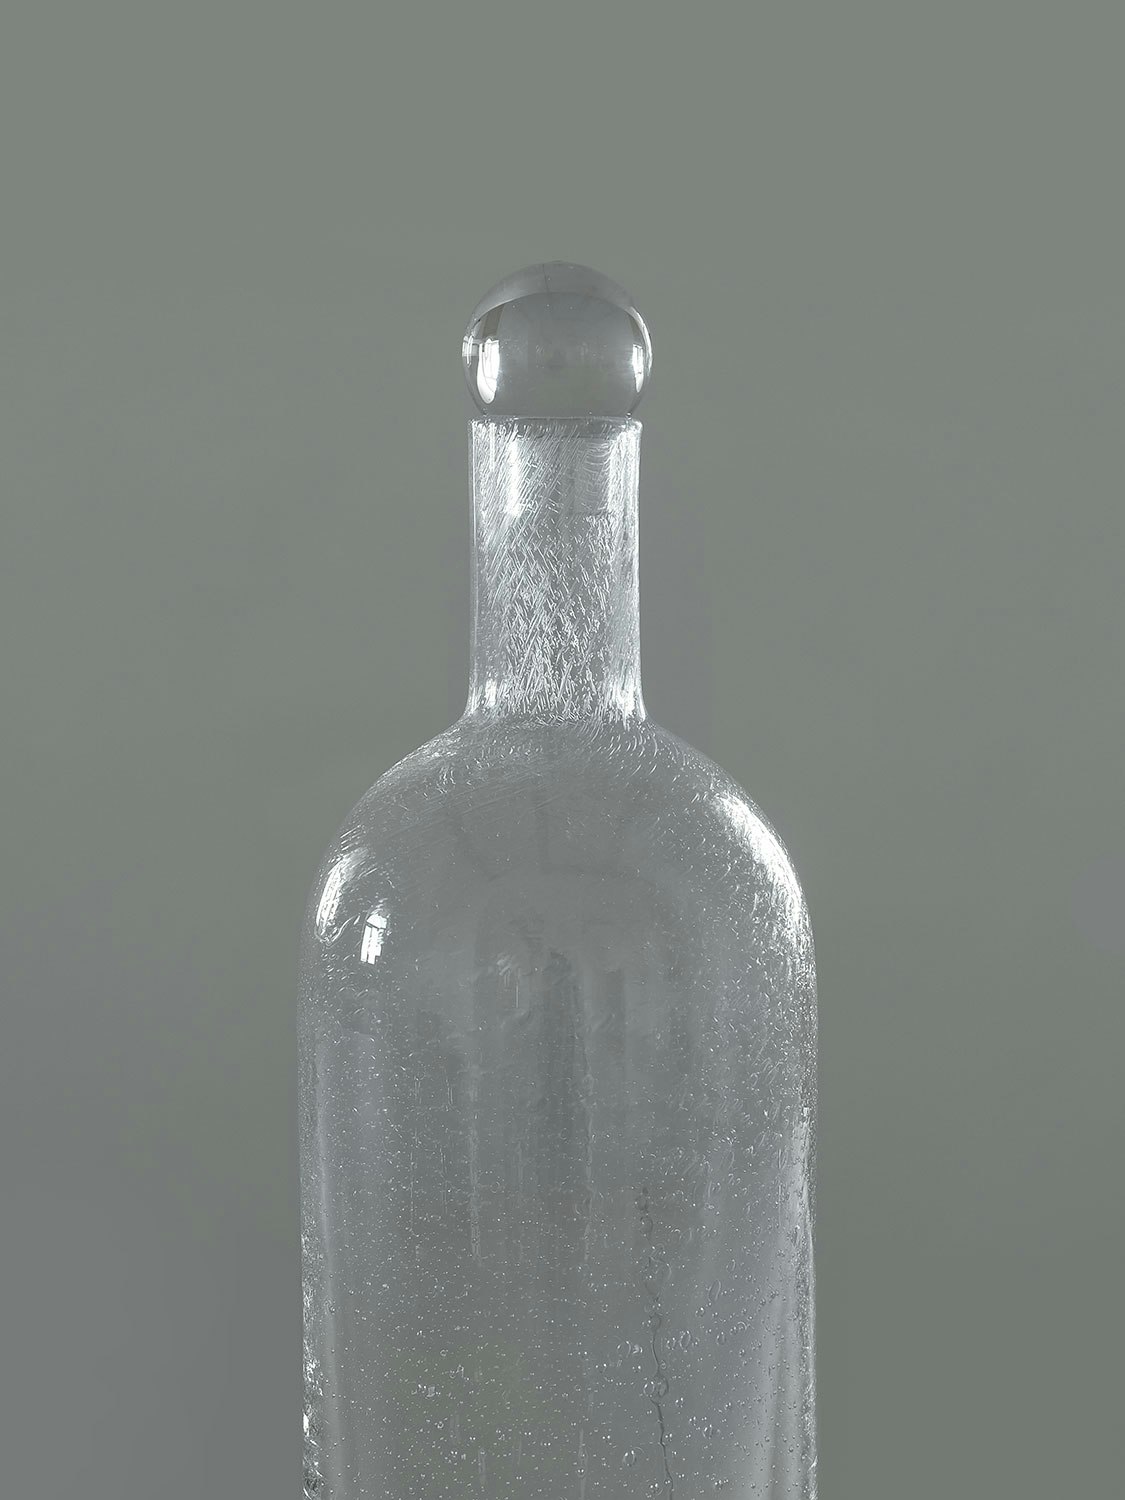 https://royaldesign.com/image/2/louise-roe-bubble-glass-carafe-tall-4?w=800&quality=80